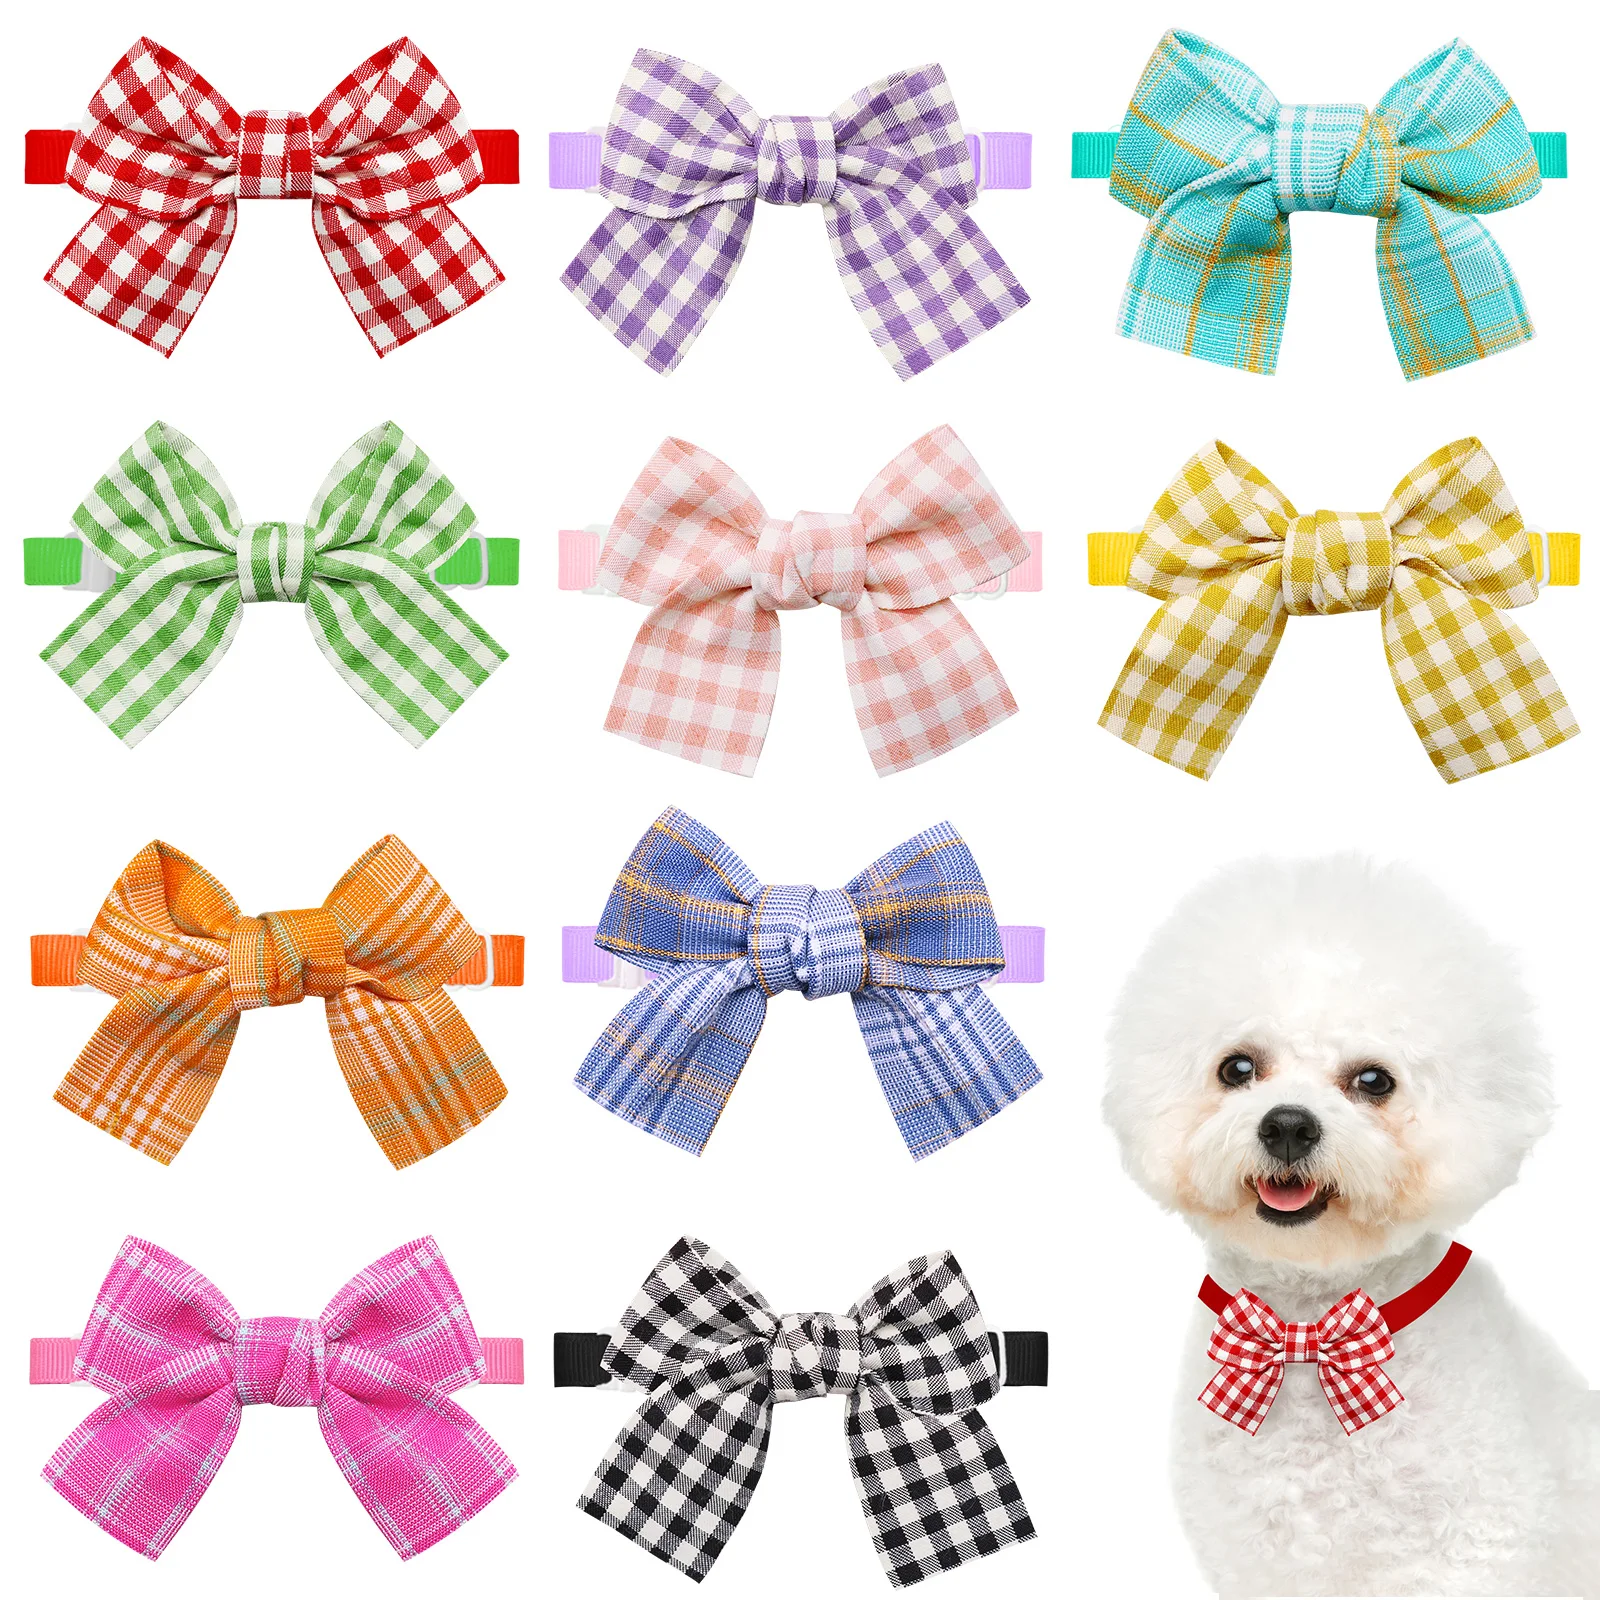 50/100pc Paid Style Dog Bowtie Cute Small Dog Cat Bow Tie Neckties For Dogs Pets Bows For Dog Grooming Accessories Pet Supplies